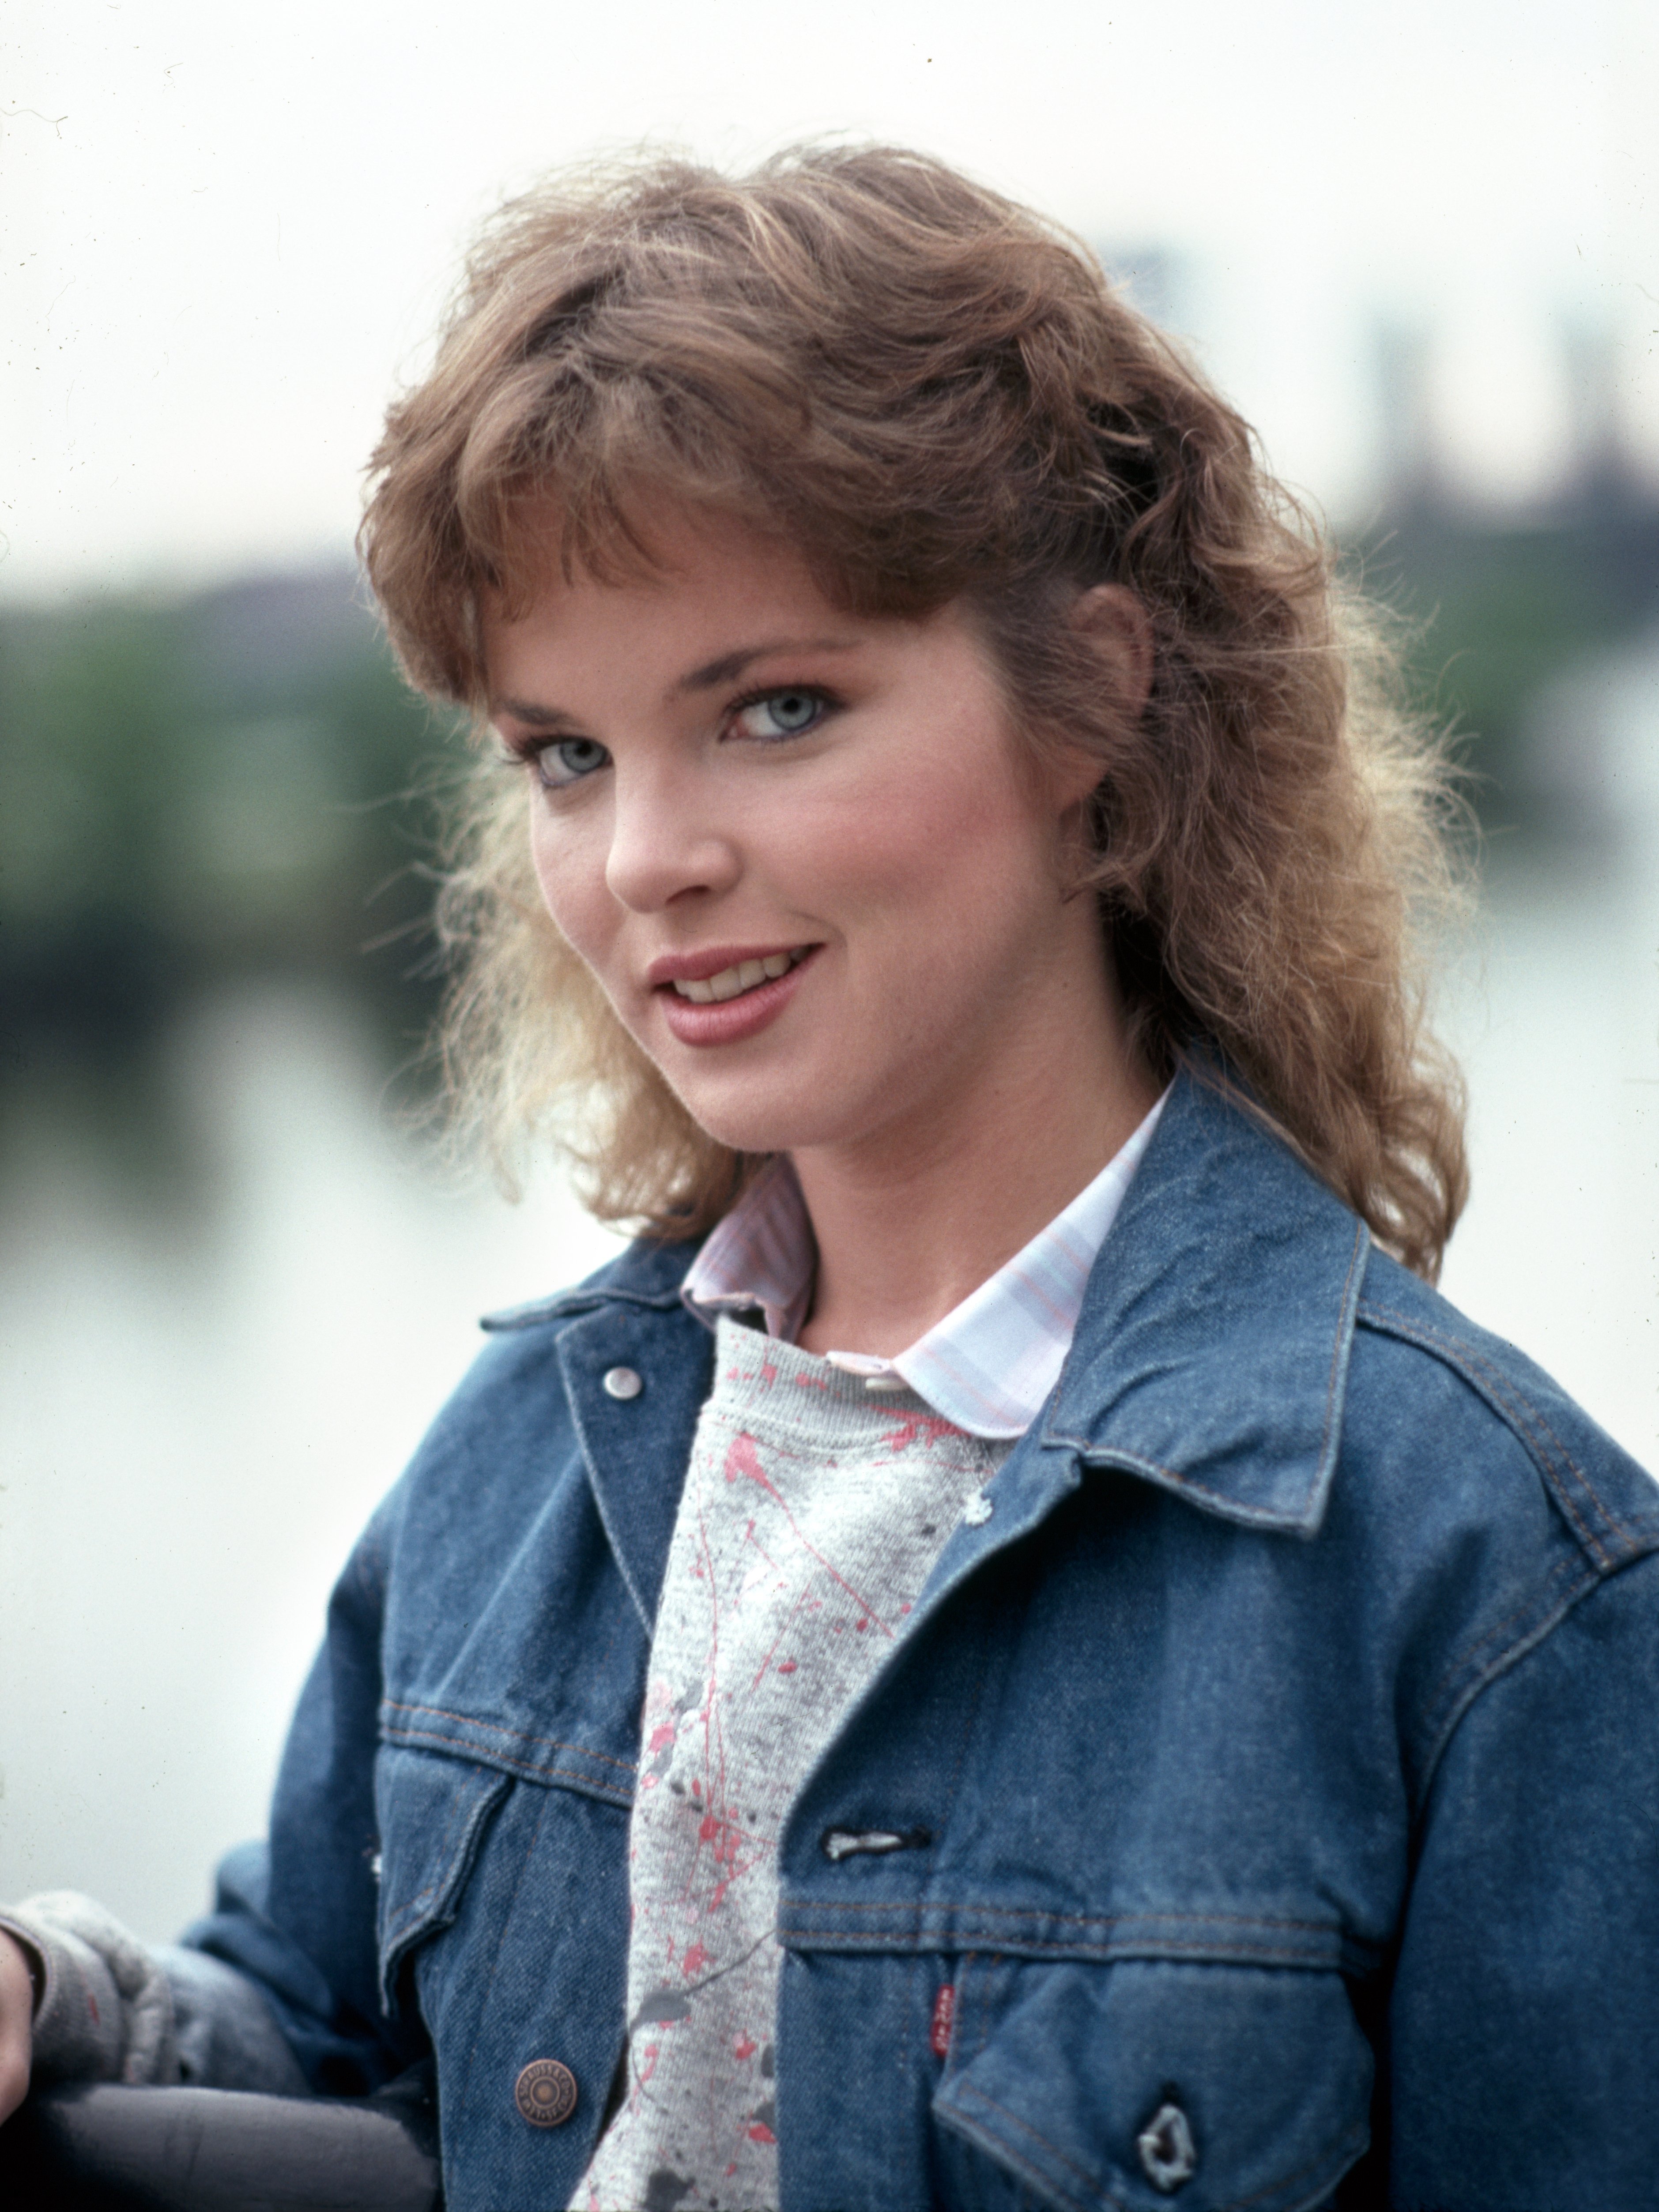 Pictured: Melissa Sue Anderson as Toby King, the babysitter on the "First Affair" broadcast on October 25, 1983. / Source: Getty Images